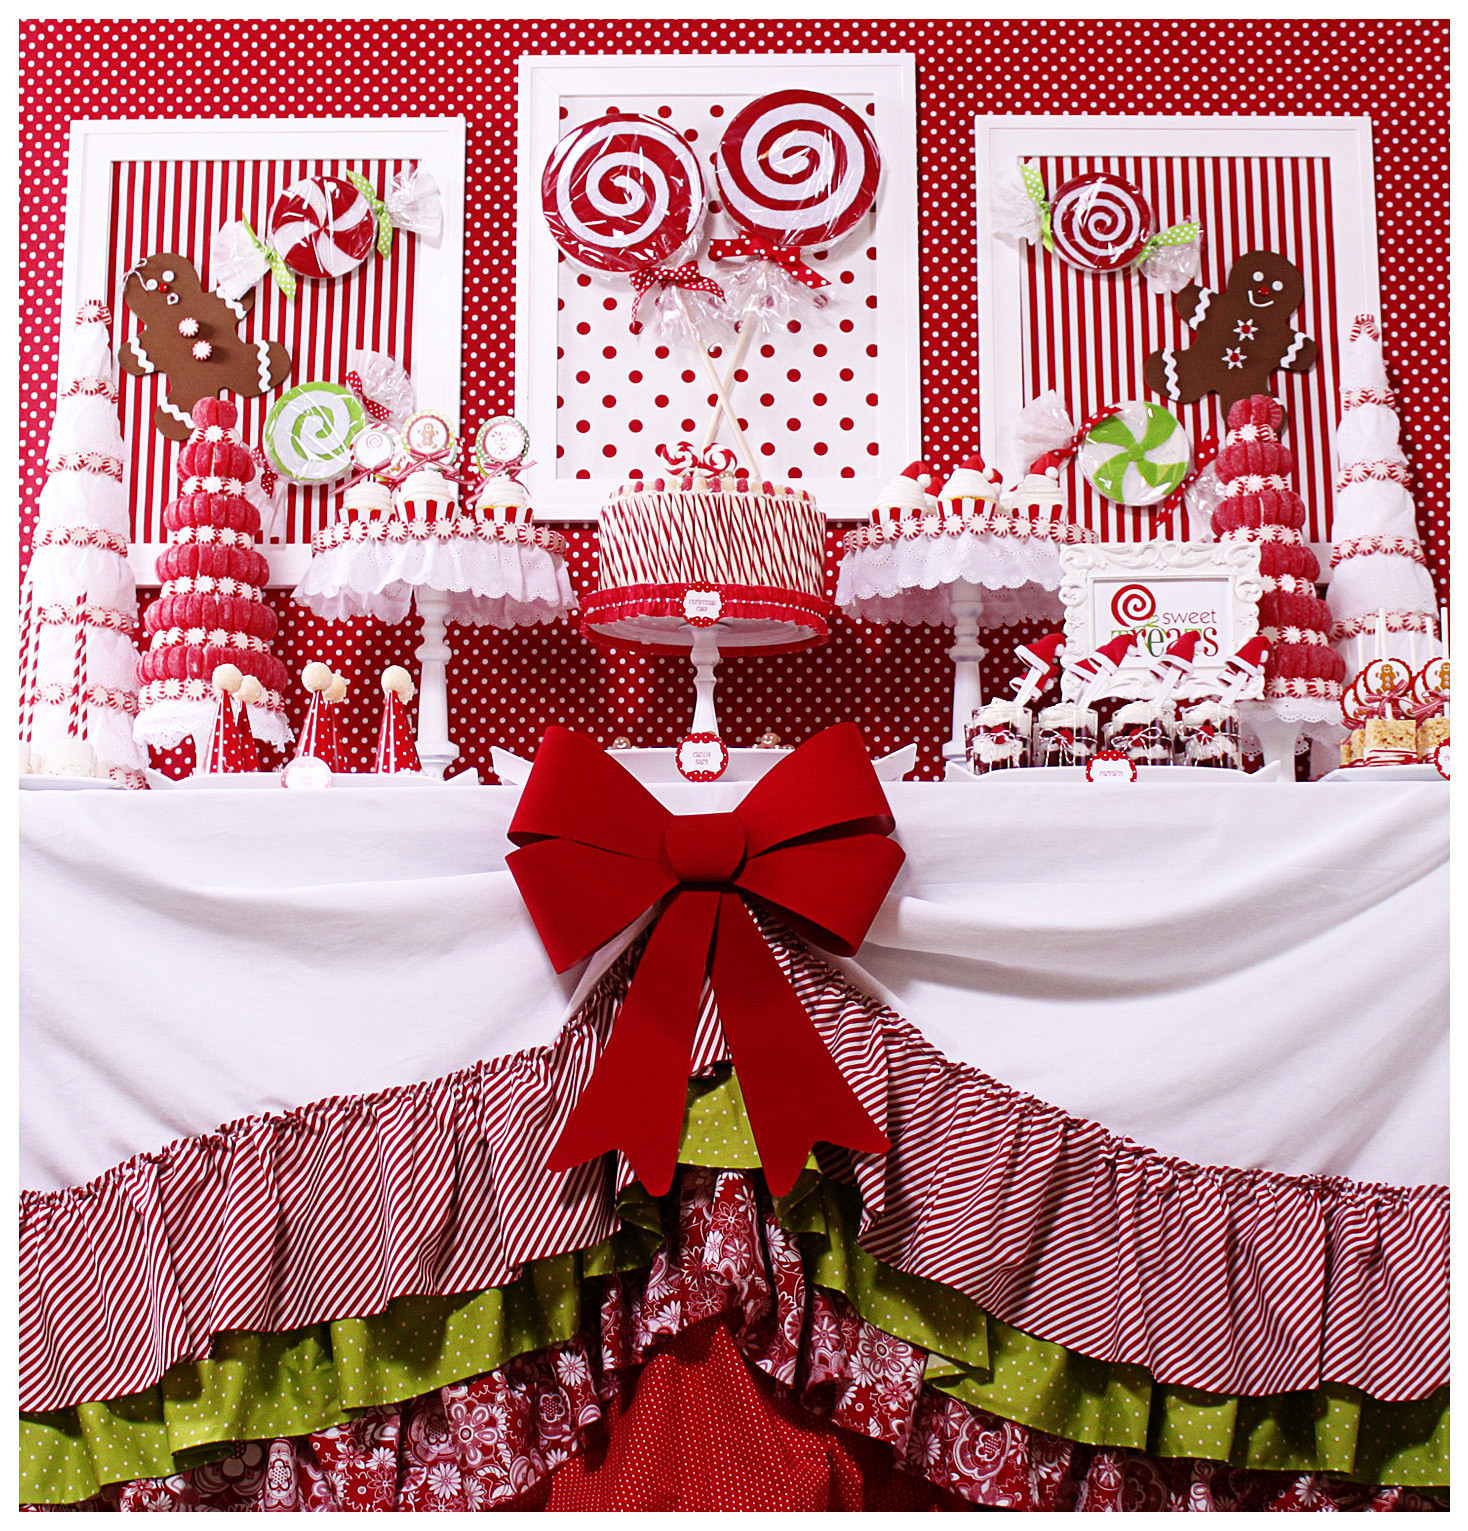 Christmas Holiday Party Ideas
 Kara s Party Ideas Candy Land Christmas Party